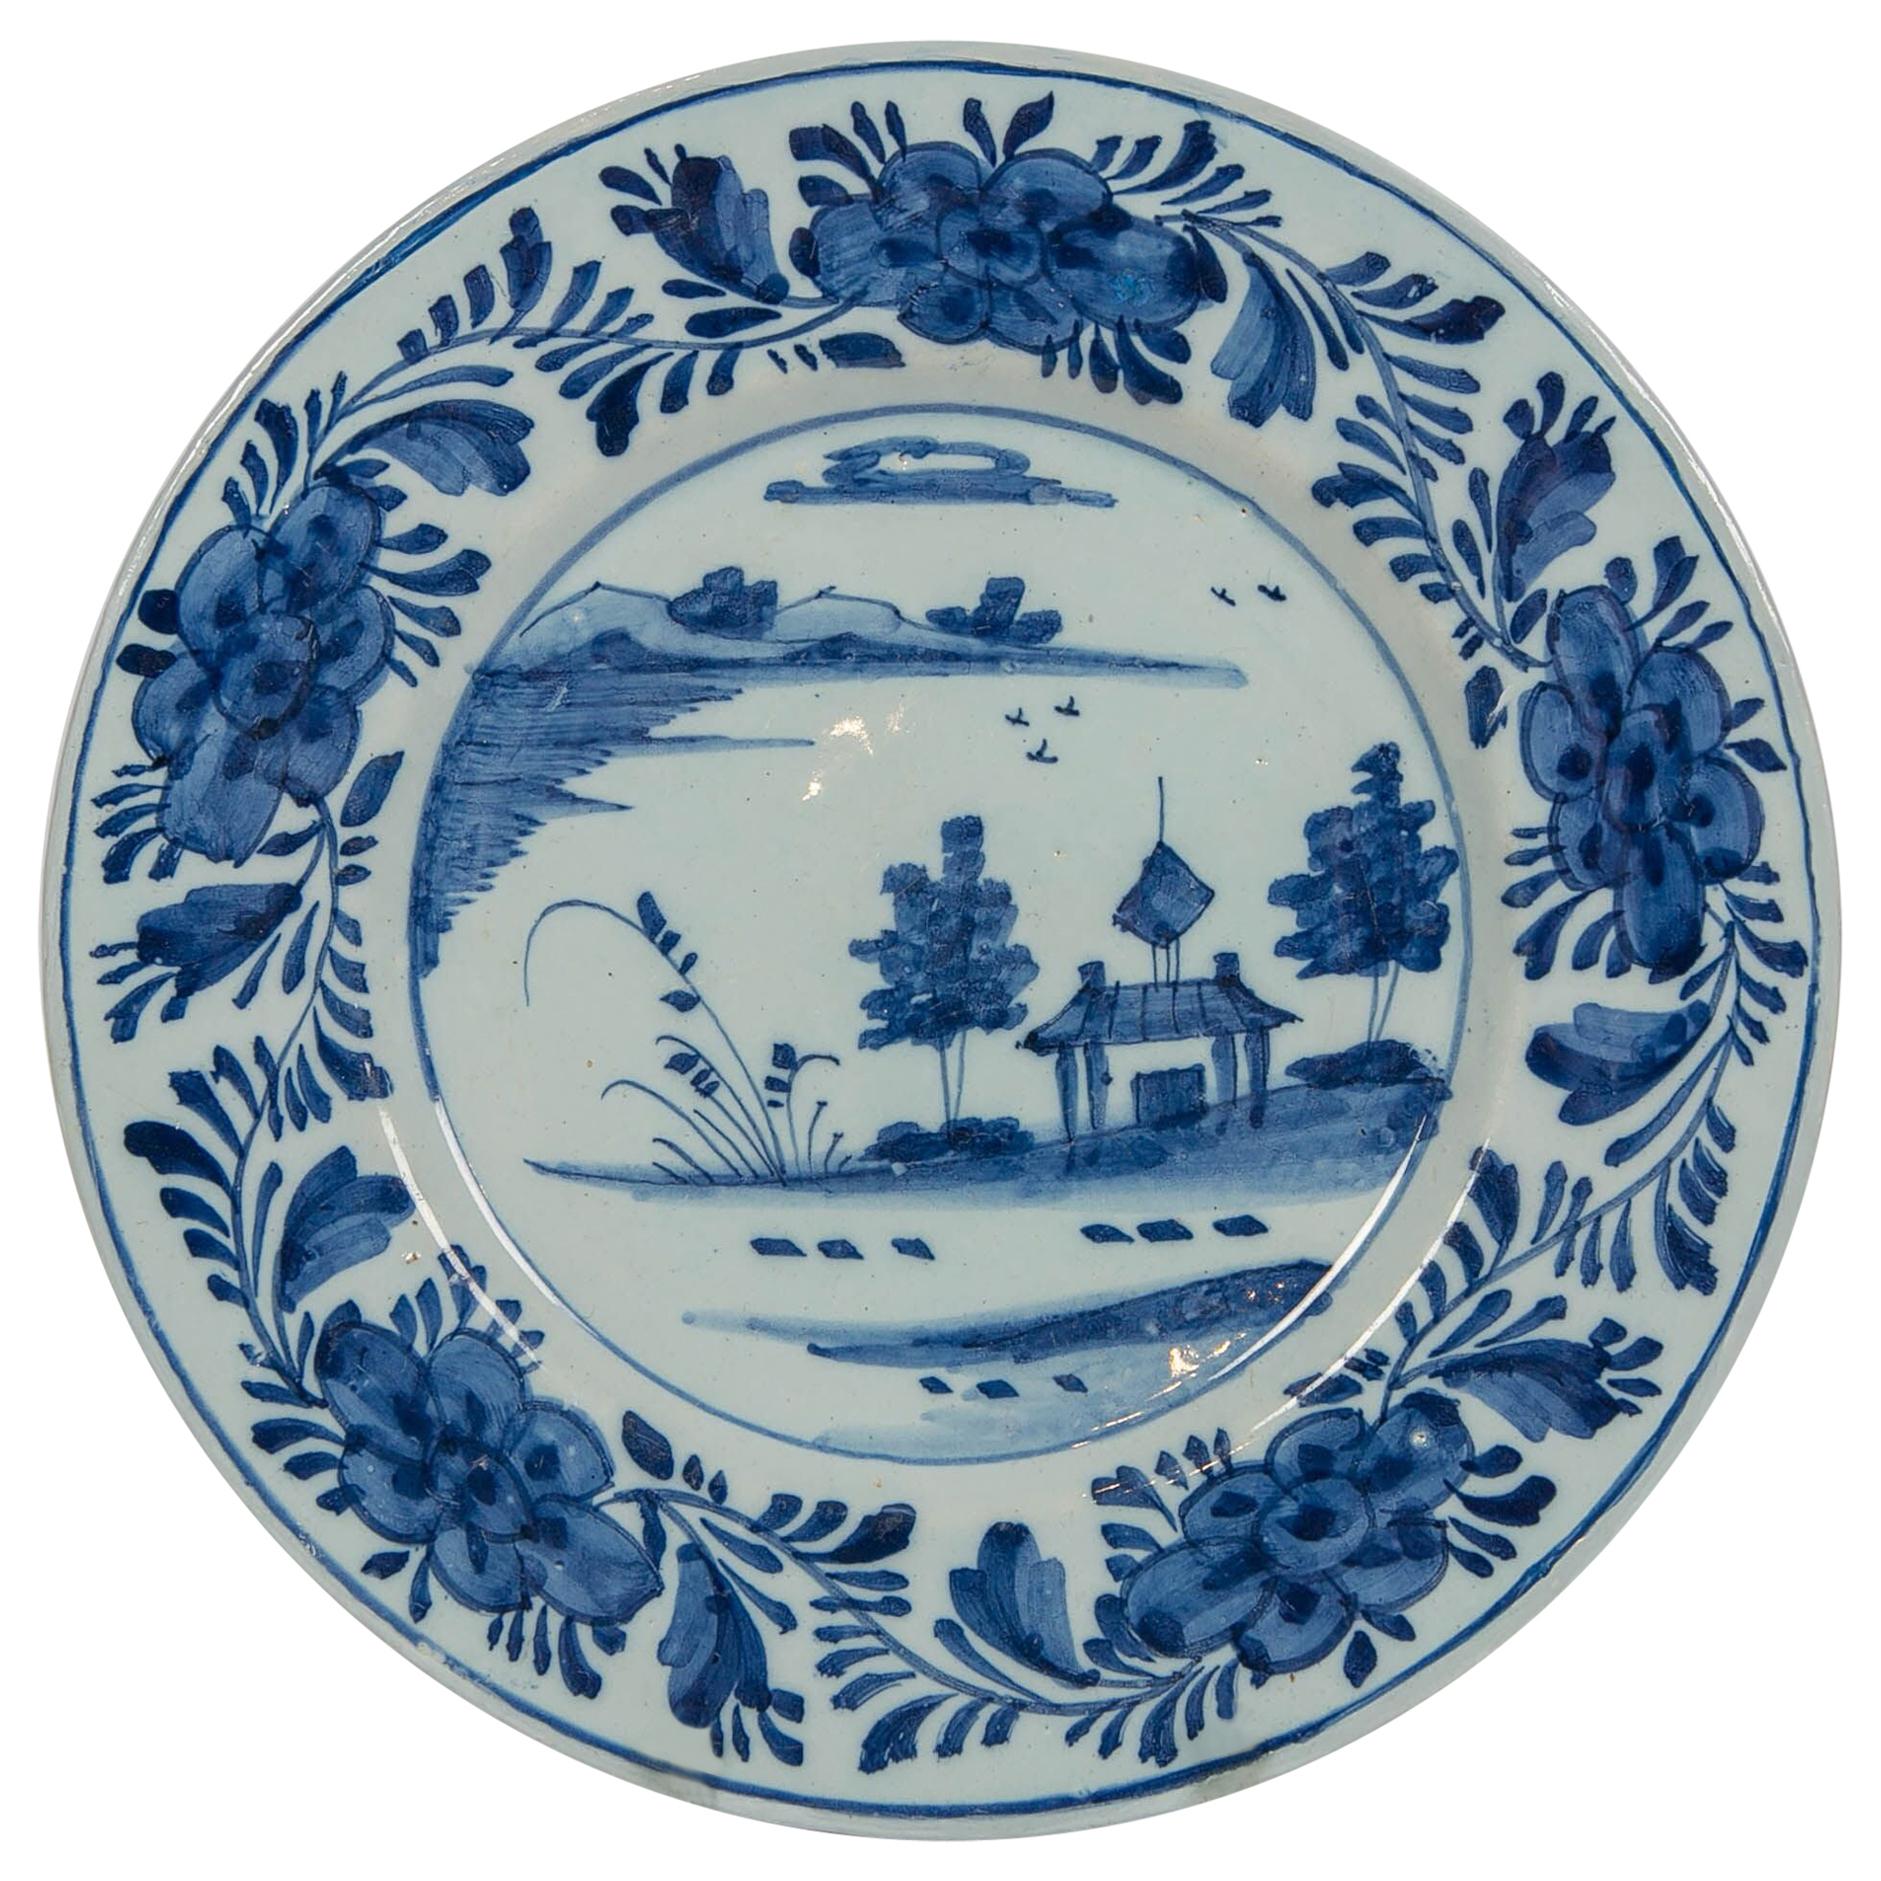 Delft Blue and White Dish Showing a Pagoda by the Waterside Made circa 1780